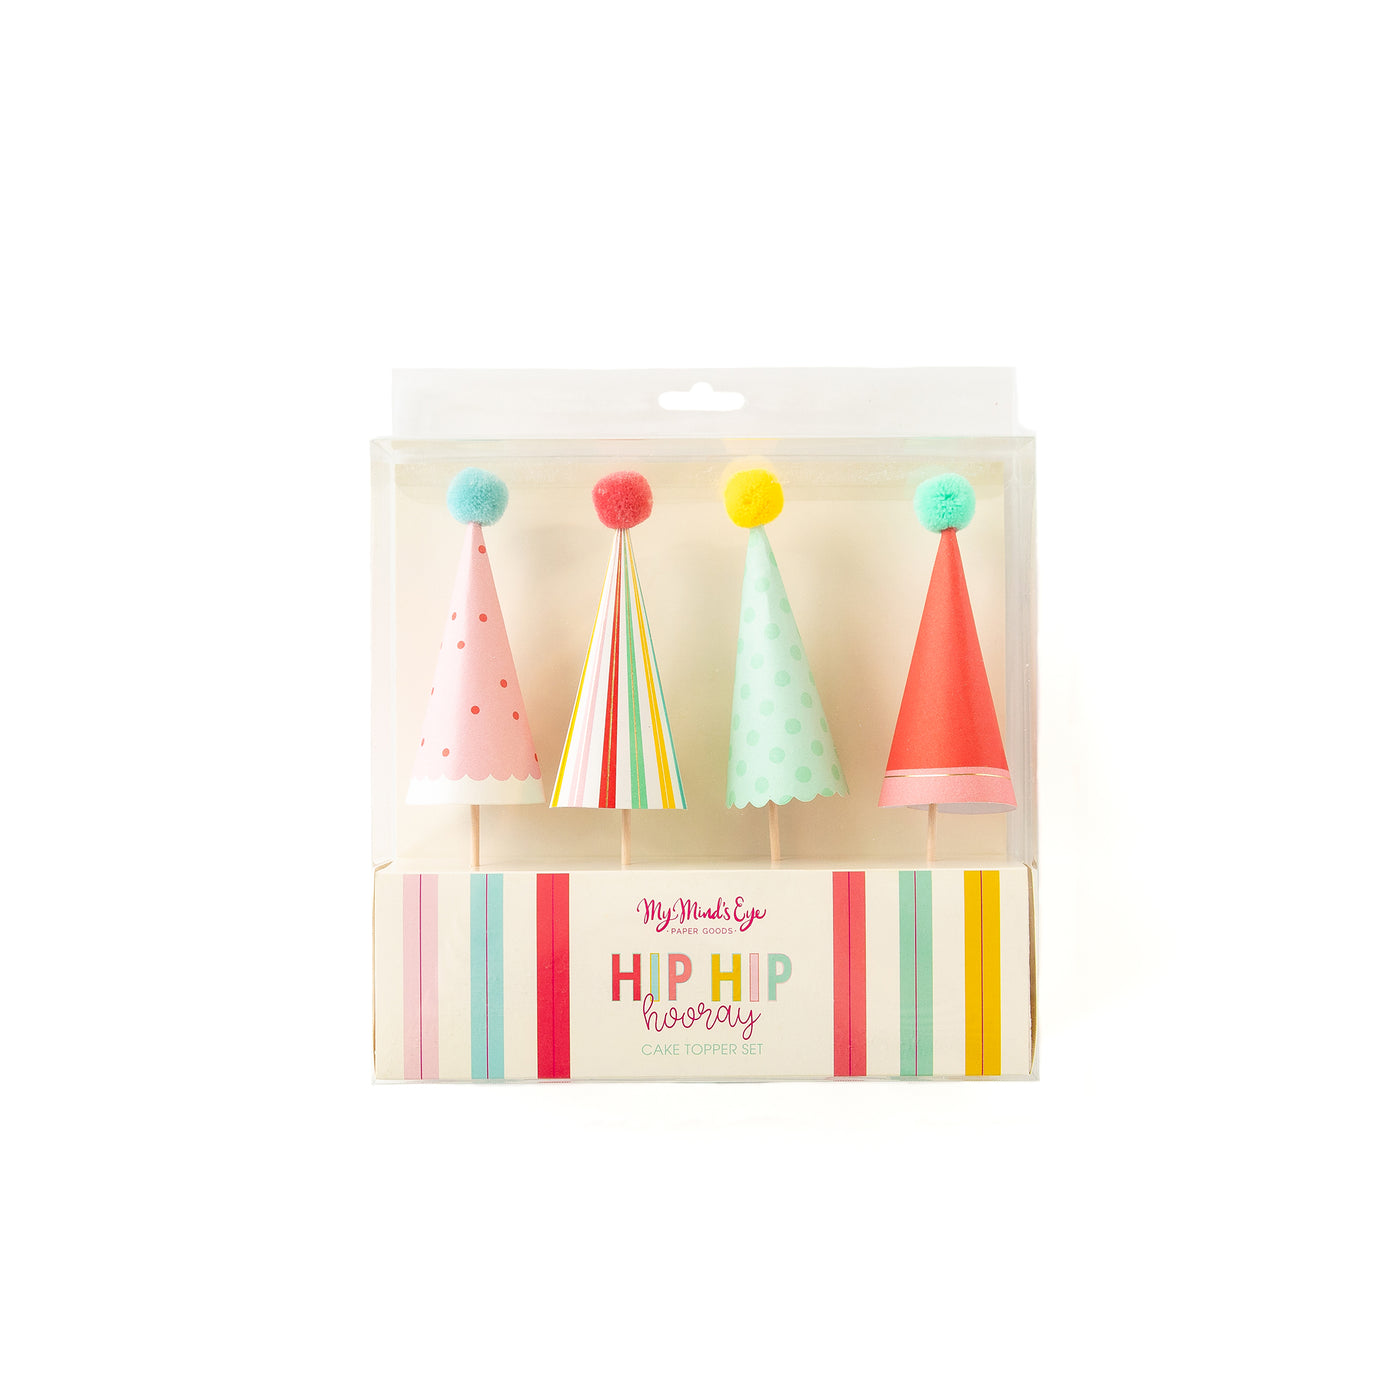 HBD815A - Hip Hip Hooray Cake Toppers